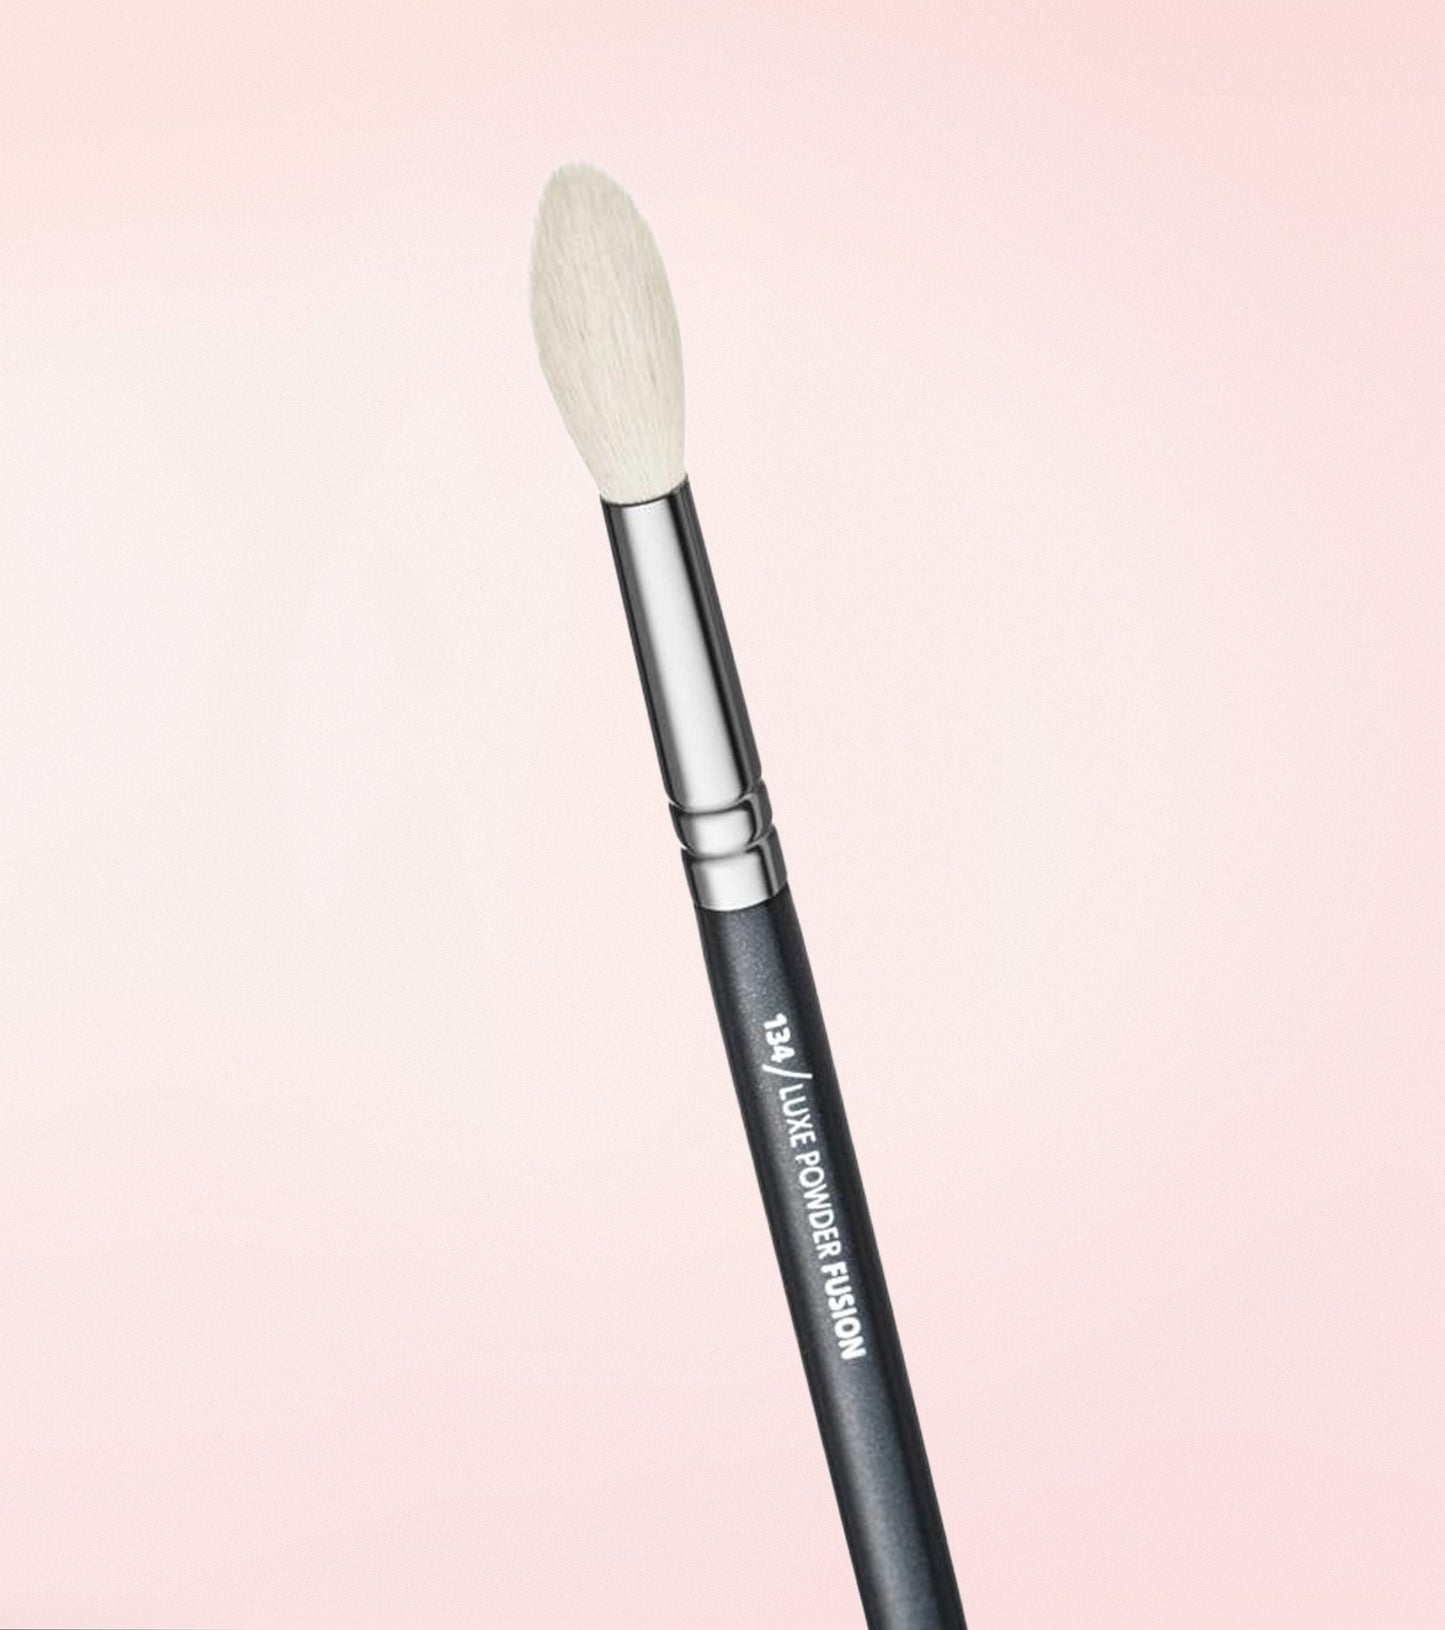 134 Luxe Powder Fusion Brush Expanded Image 2